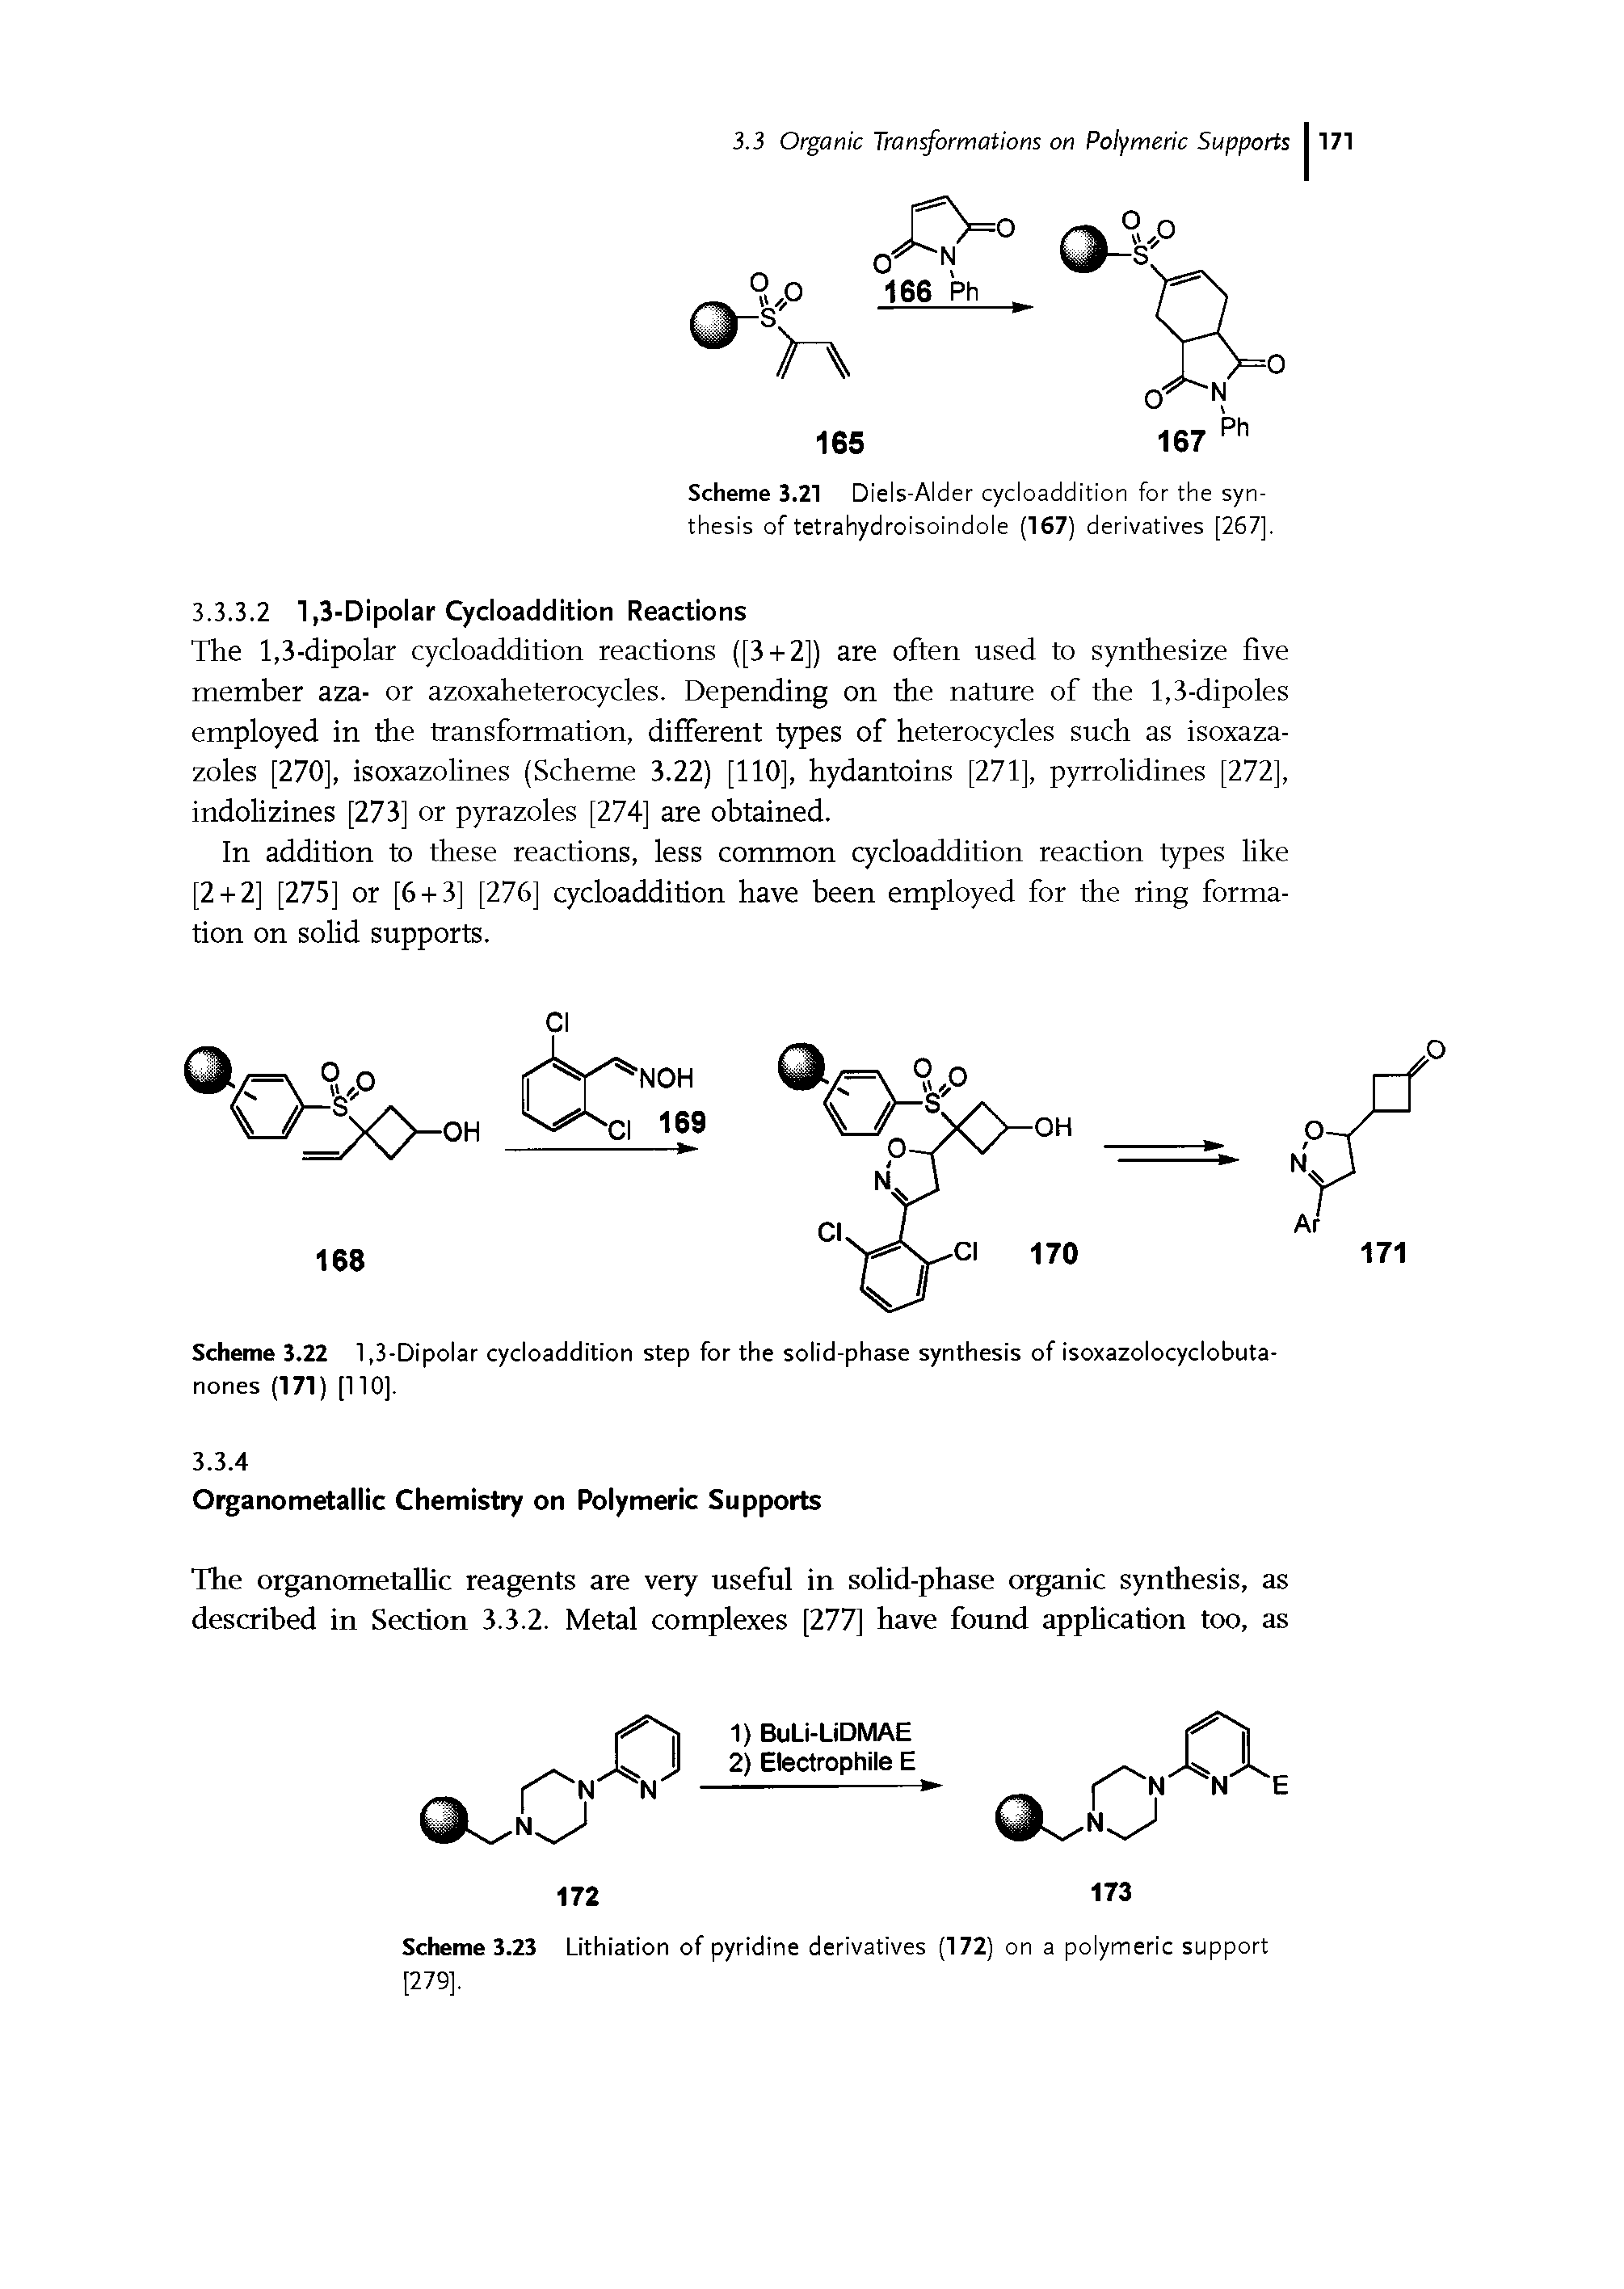 Scheme 3.22 1,3-Dipolar cydoaddition step for the solid-phase synthesis of isoxazolocyclobuta-nones (171) [110],...